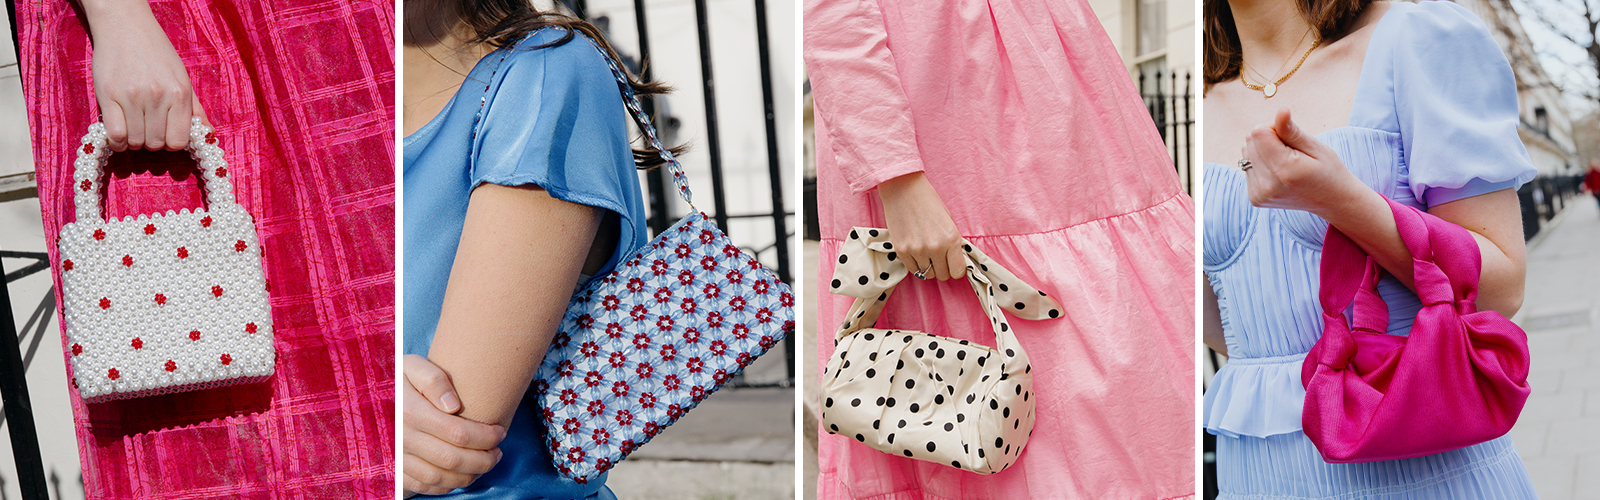 If You Miss Handbags, Here Are 9 to Put a Smile on Your Face